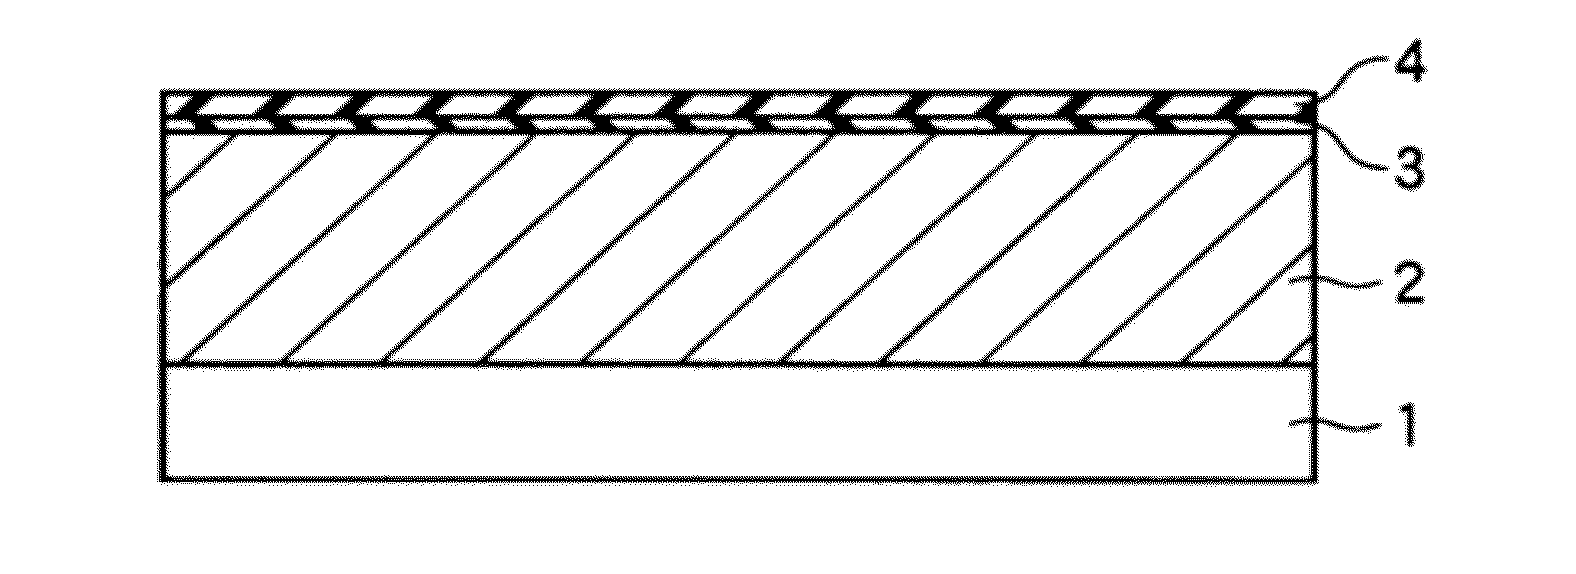 Film-forming method and film-forming apparatus for forming silicon oxide film on tungsten film or tungsten oxide film